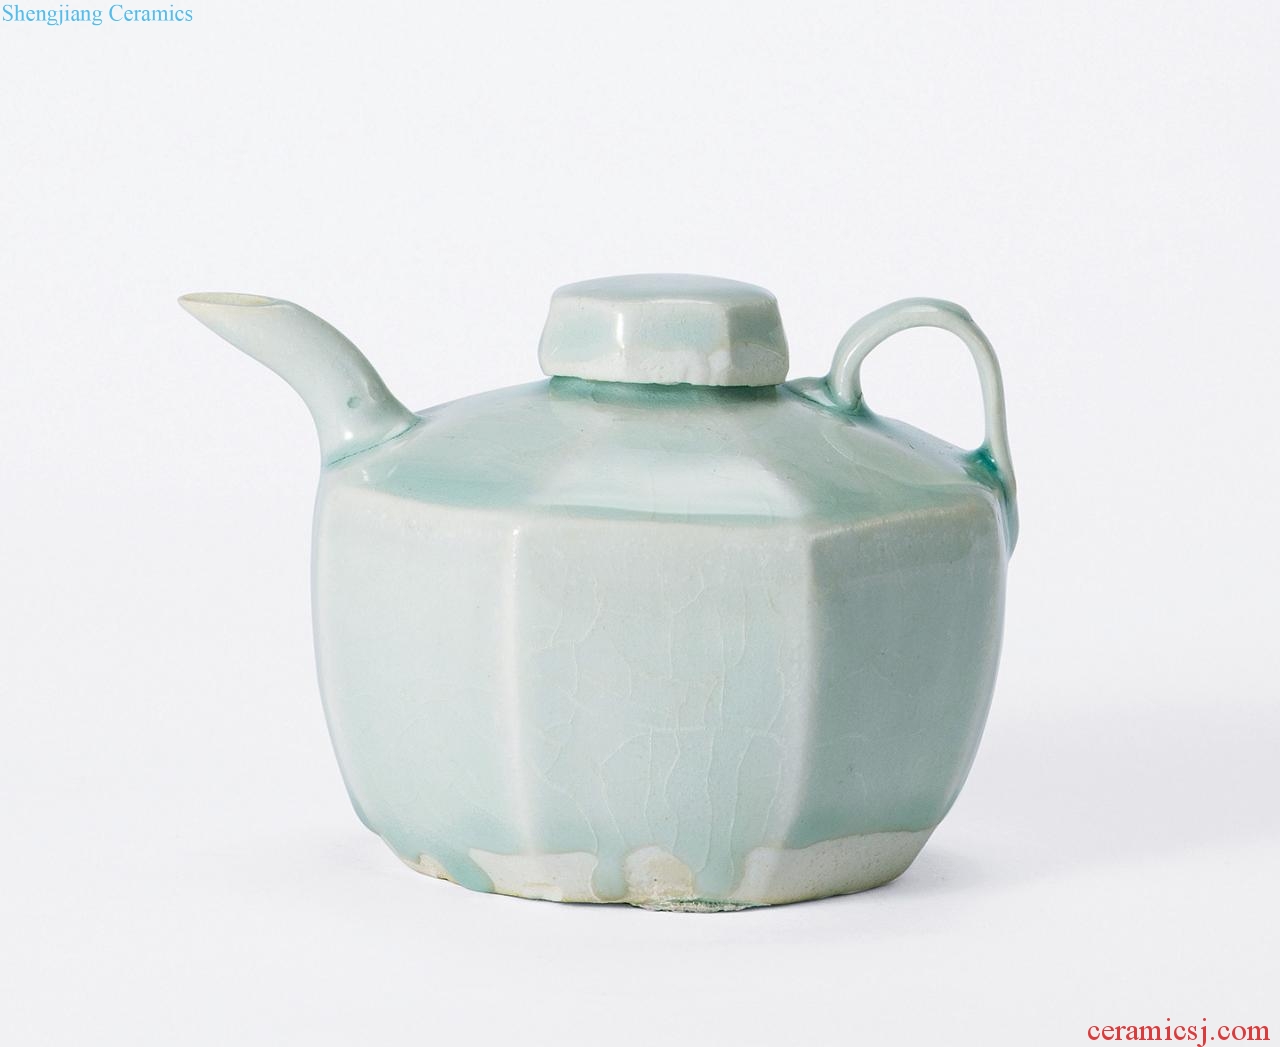 Song dynasty (960-1279), green white glaze eight small ewer